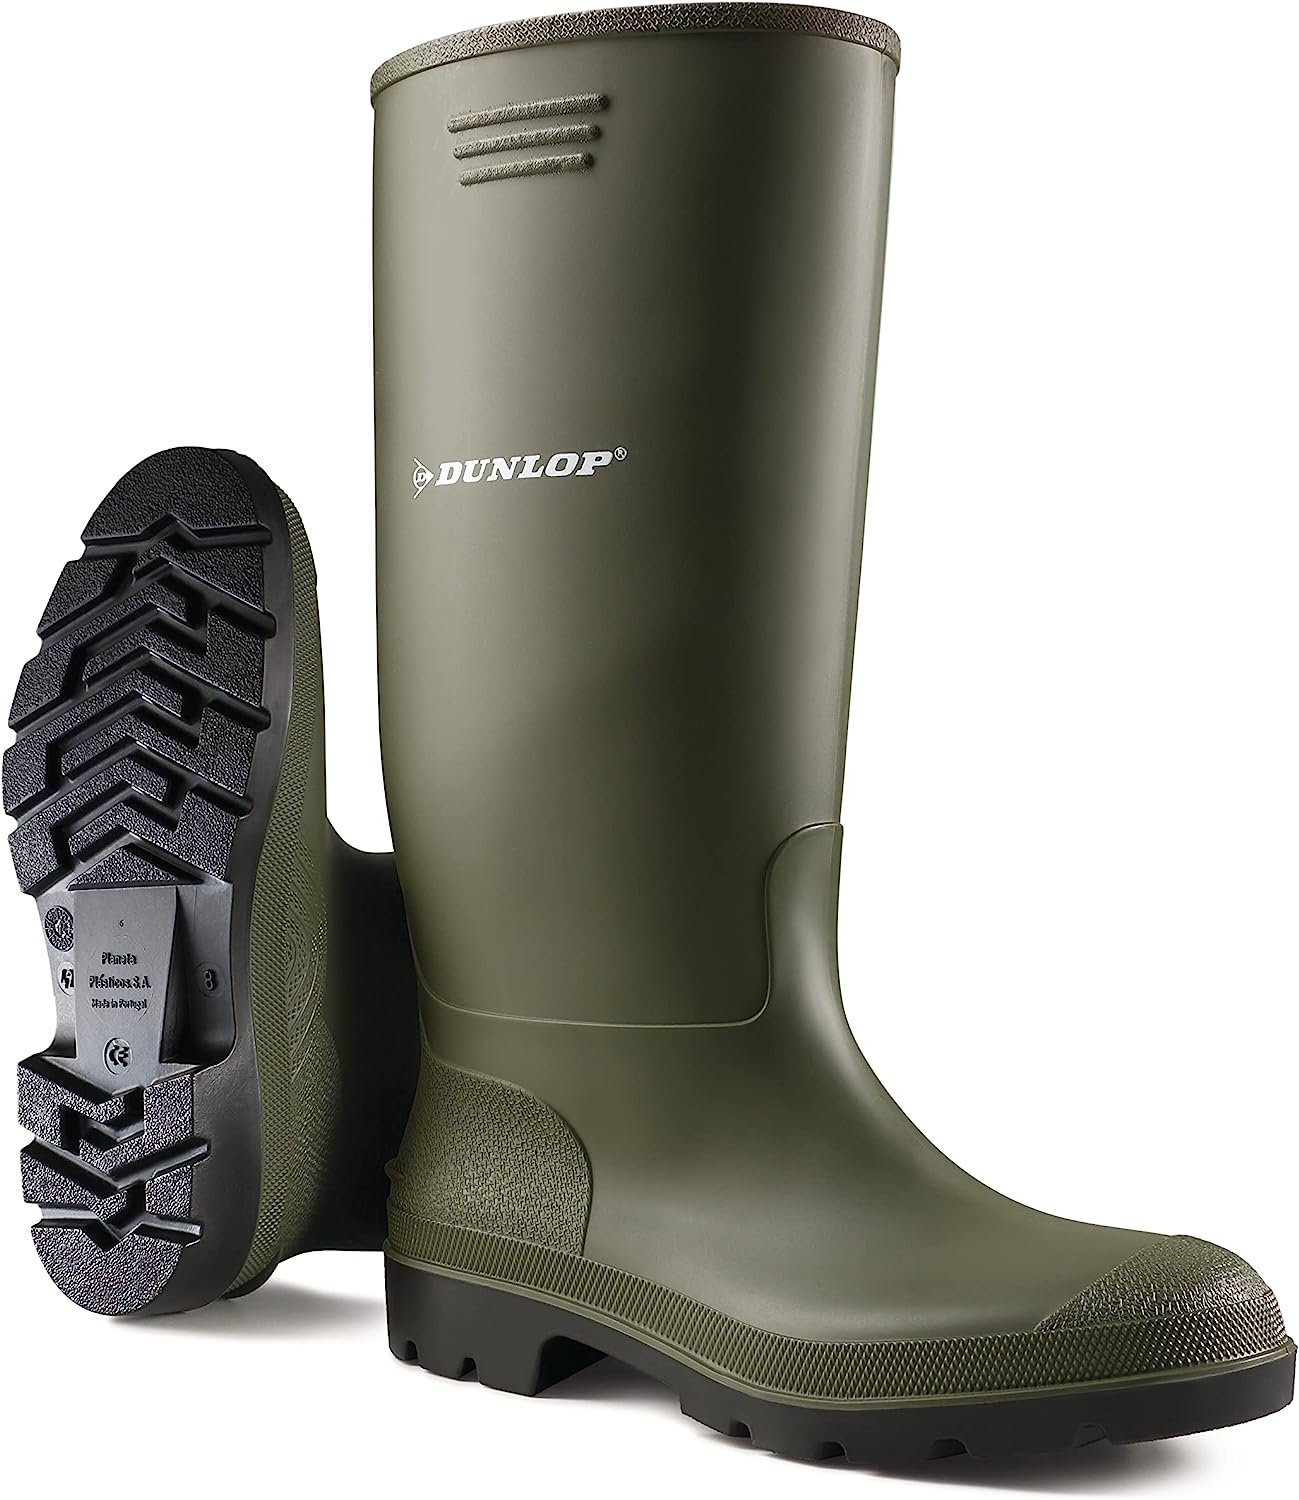 From Gardening to the Great Outdoors: Dunlop Wellington Boots Have You Covered